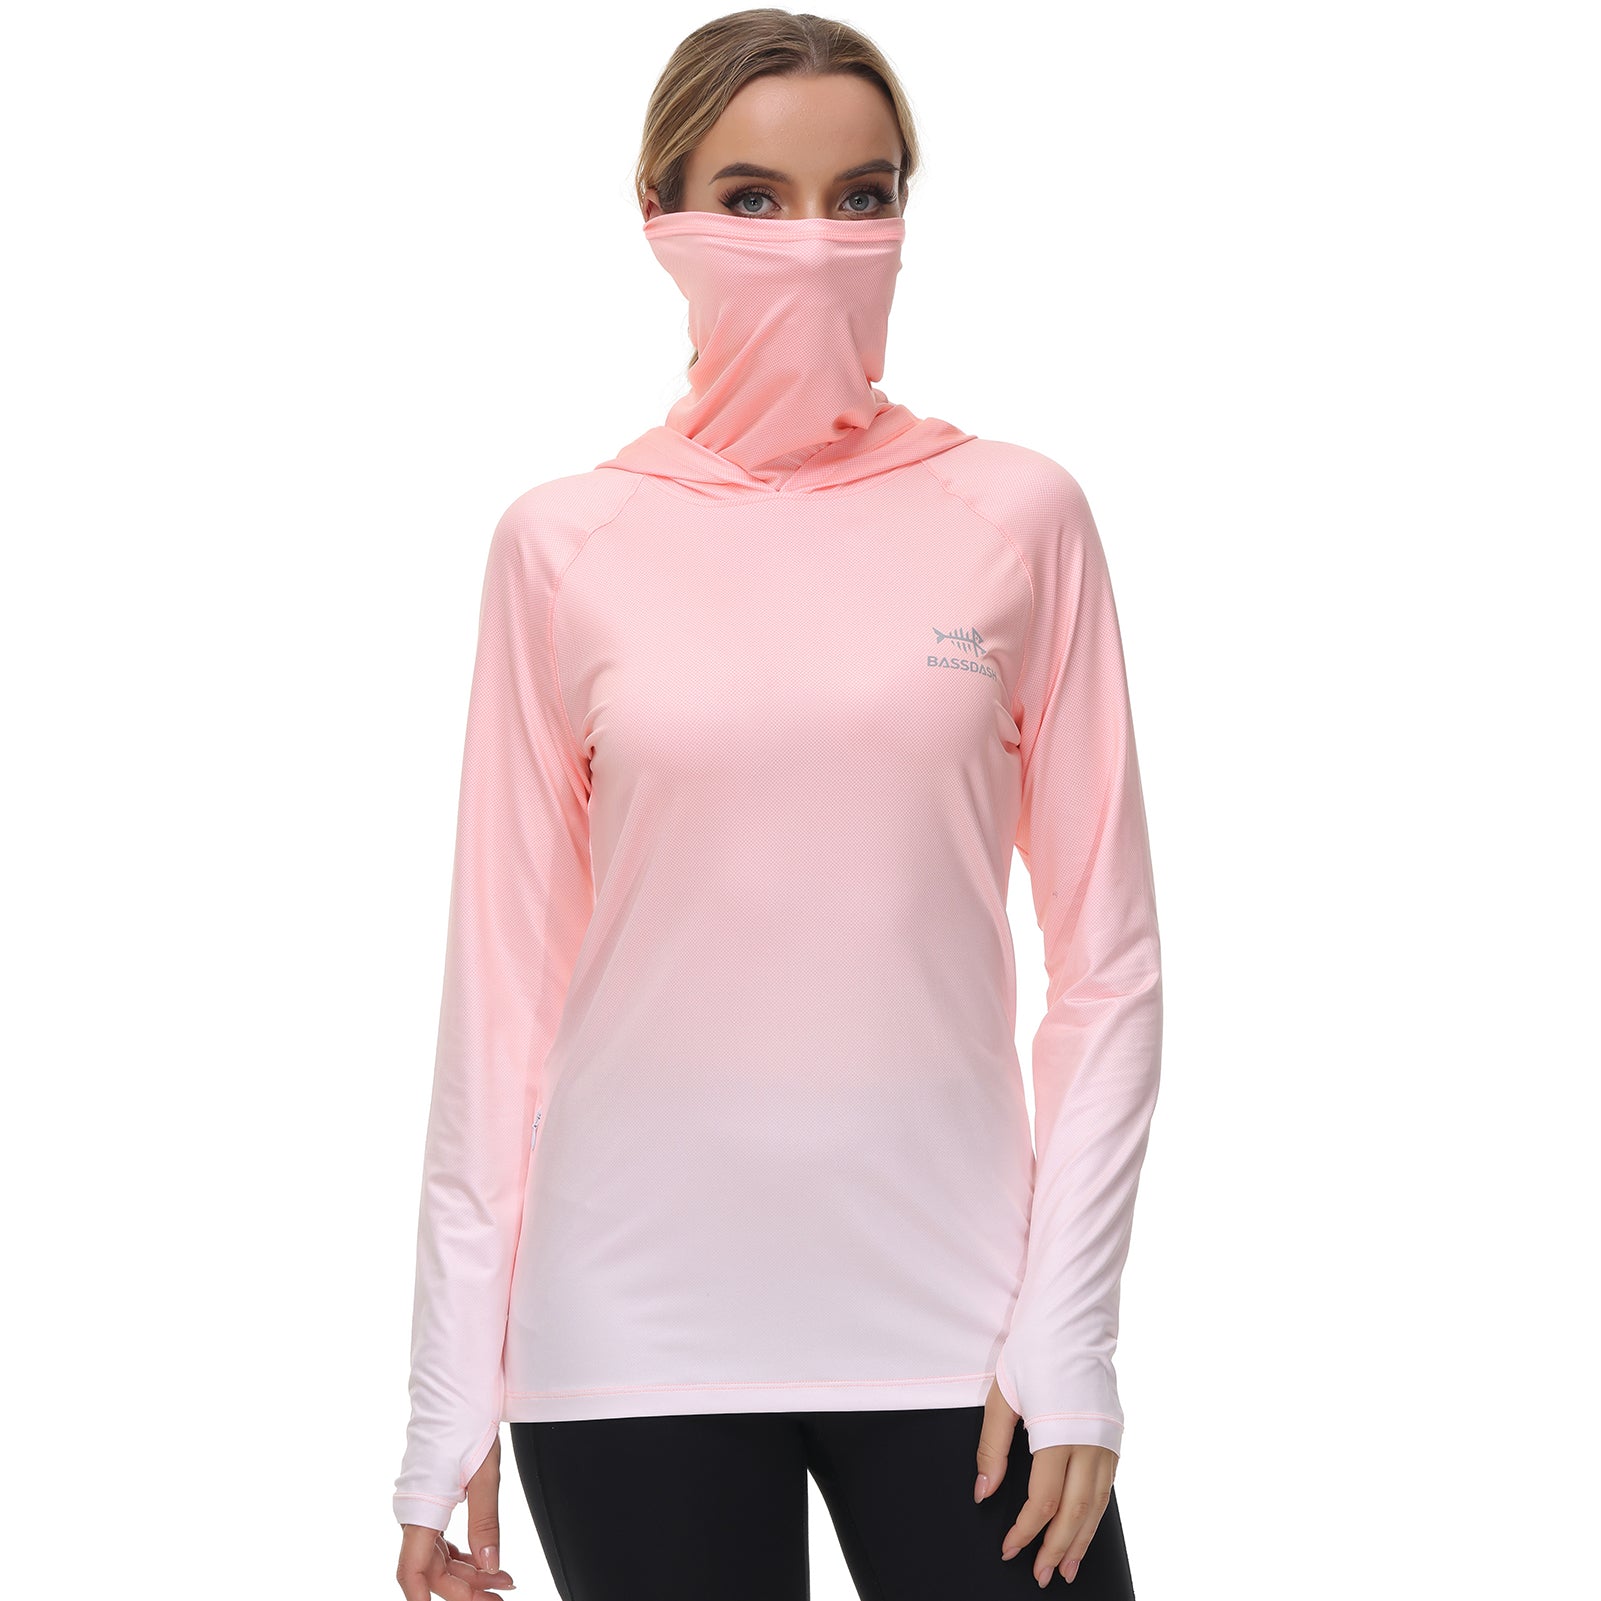 BASSDASH Women's Fishing Hoodie Shirt with Face Mask Thumb Holes UPF 50+  FS23W : Buy Online at Best Price in KSA - Souq is now : Fashion